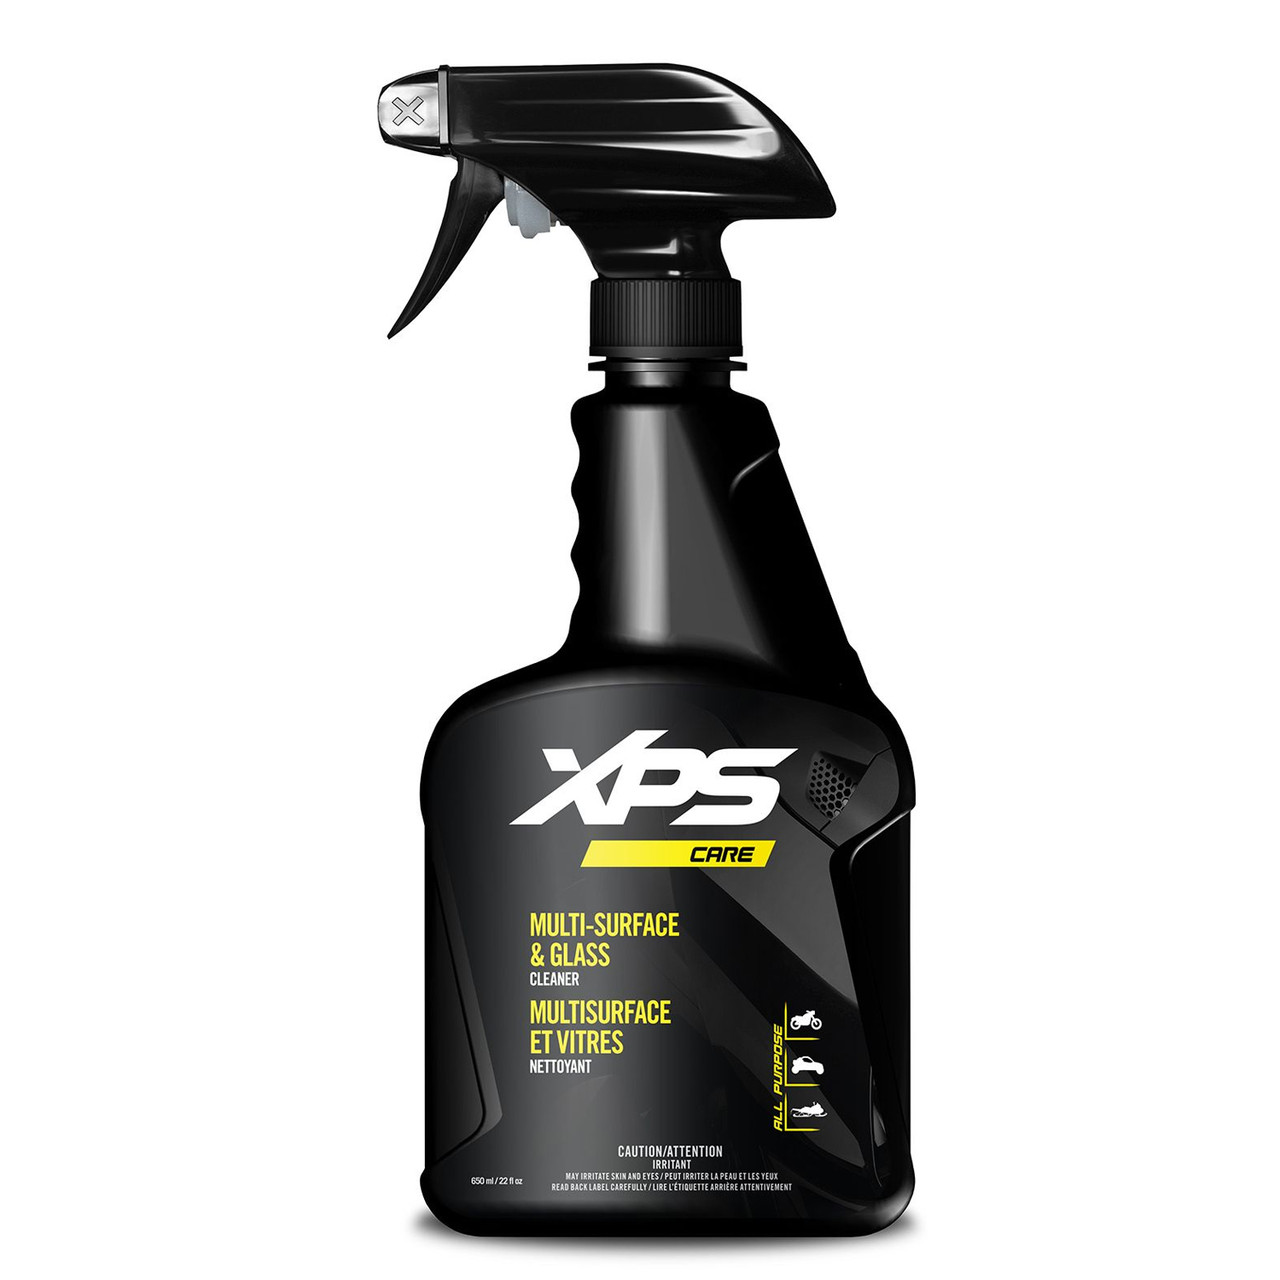 Ski-Doo New OEM 22 Fluid Ounces XPS Care Multi-Surface And Glass Cleaner, 779331